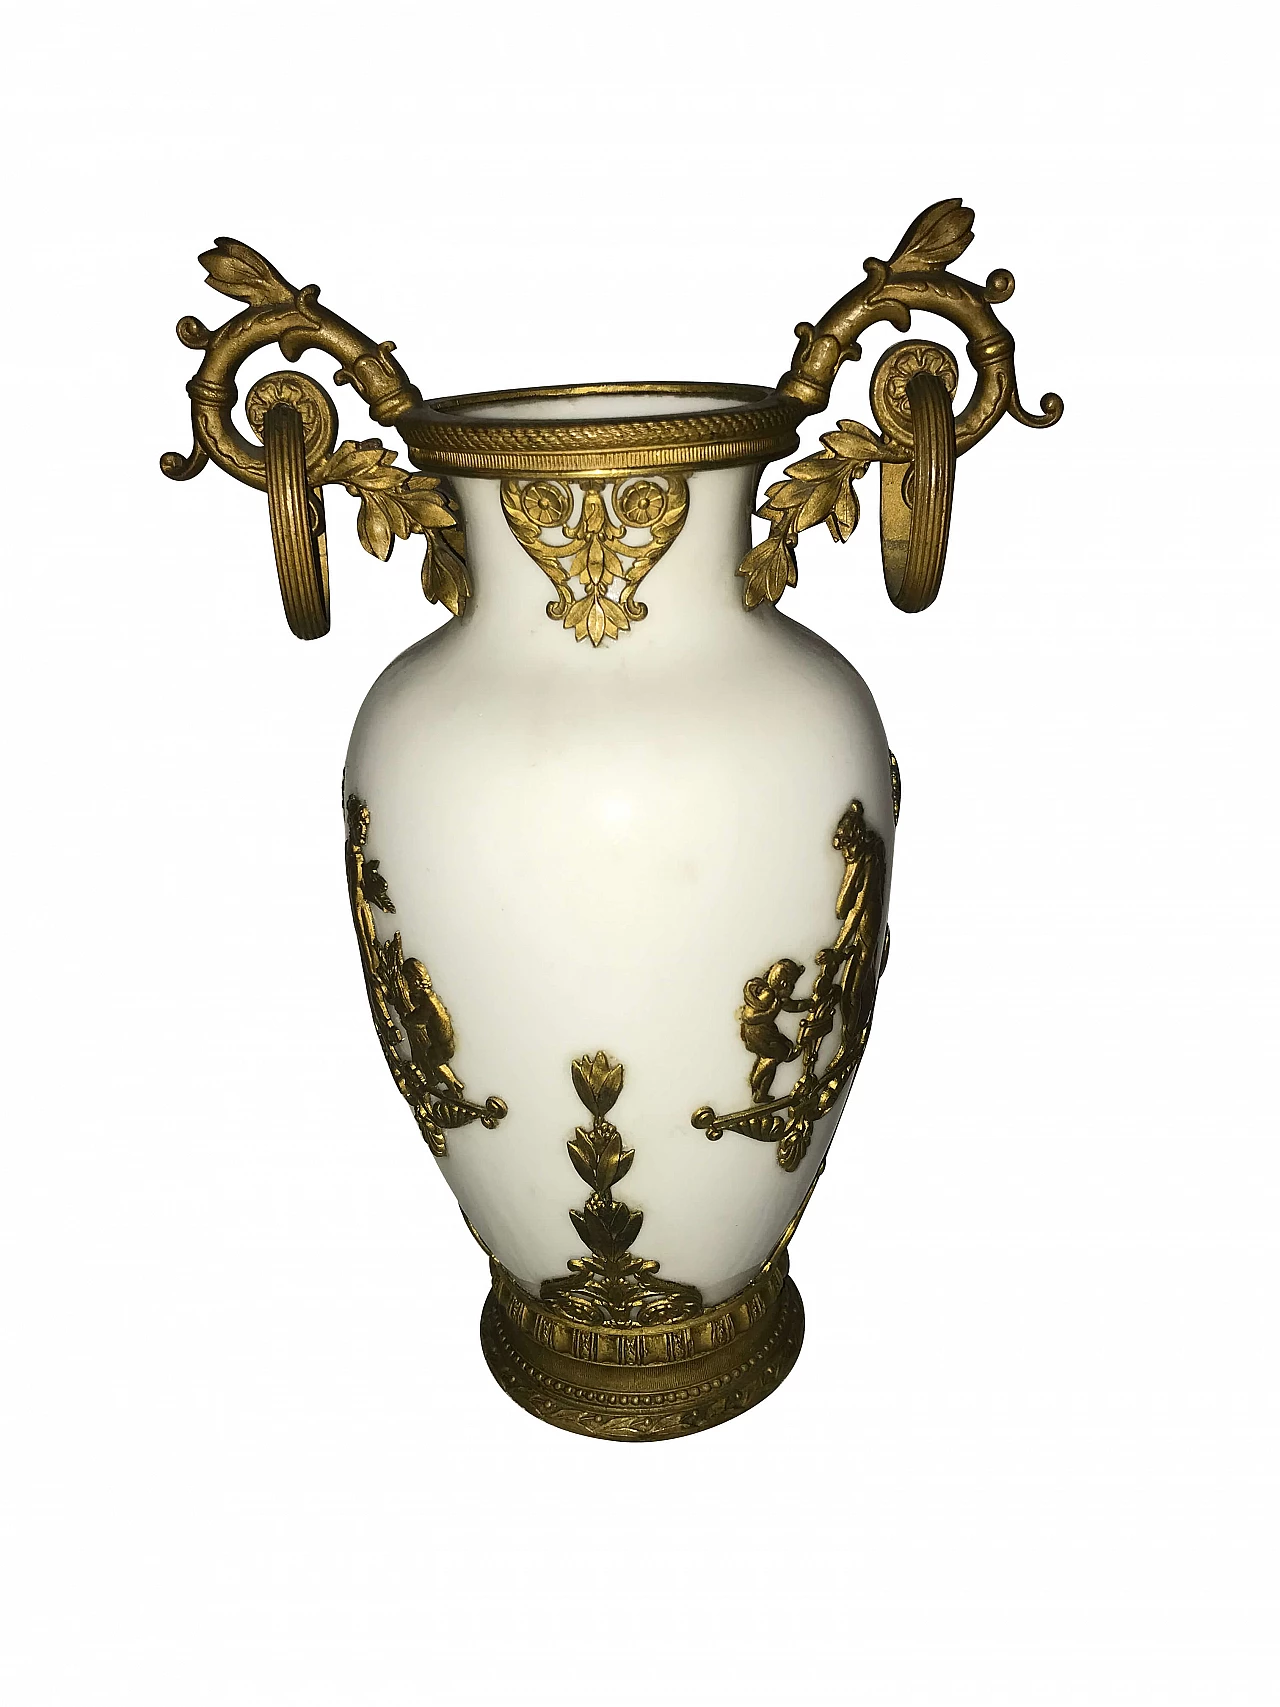 Neoclassical bronze and porcelain vase, 18th century 1276820